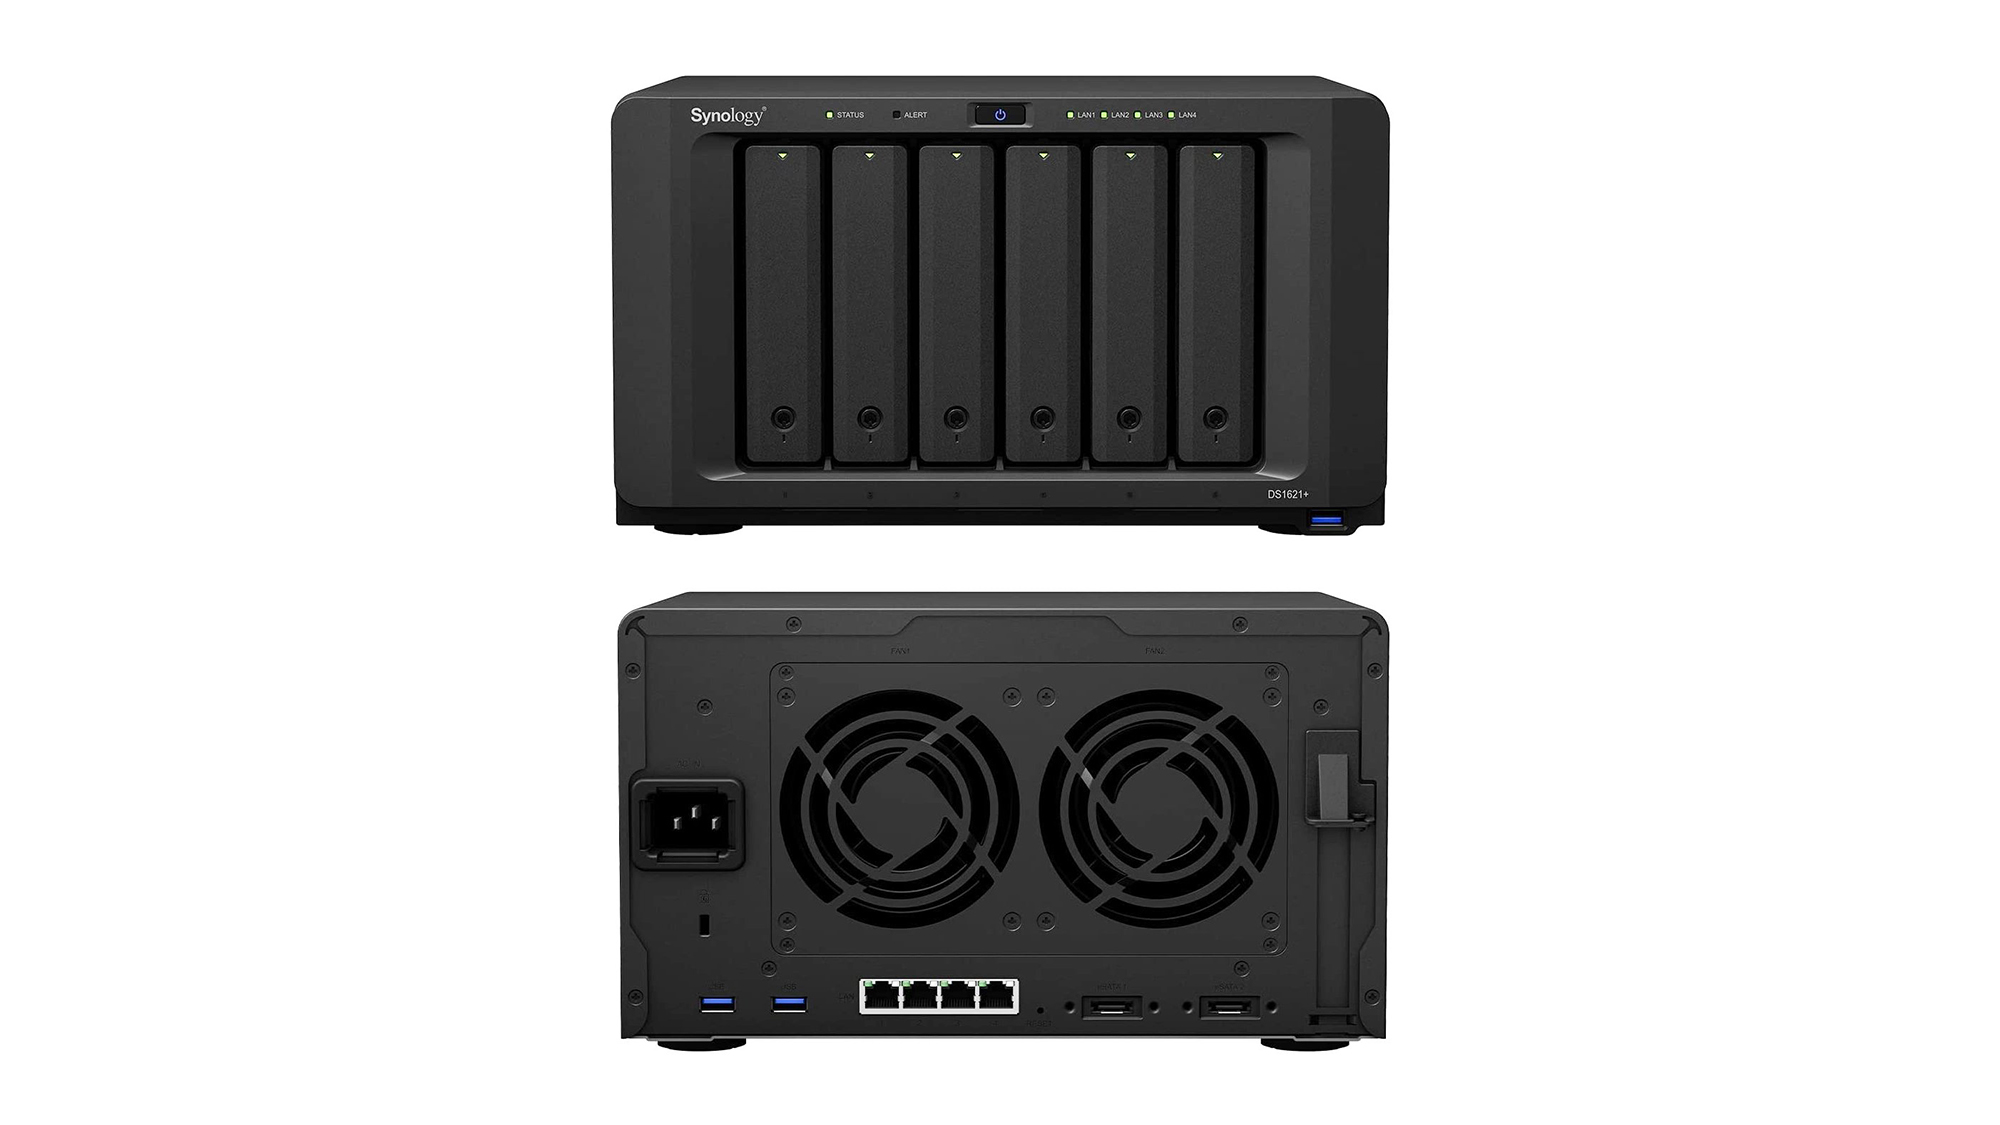 Synology DiskStation DS1621+ Review 